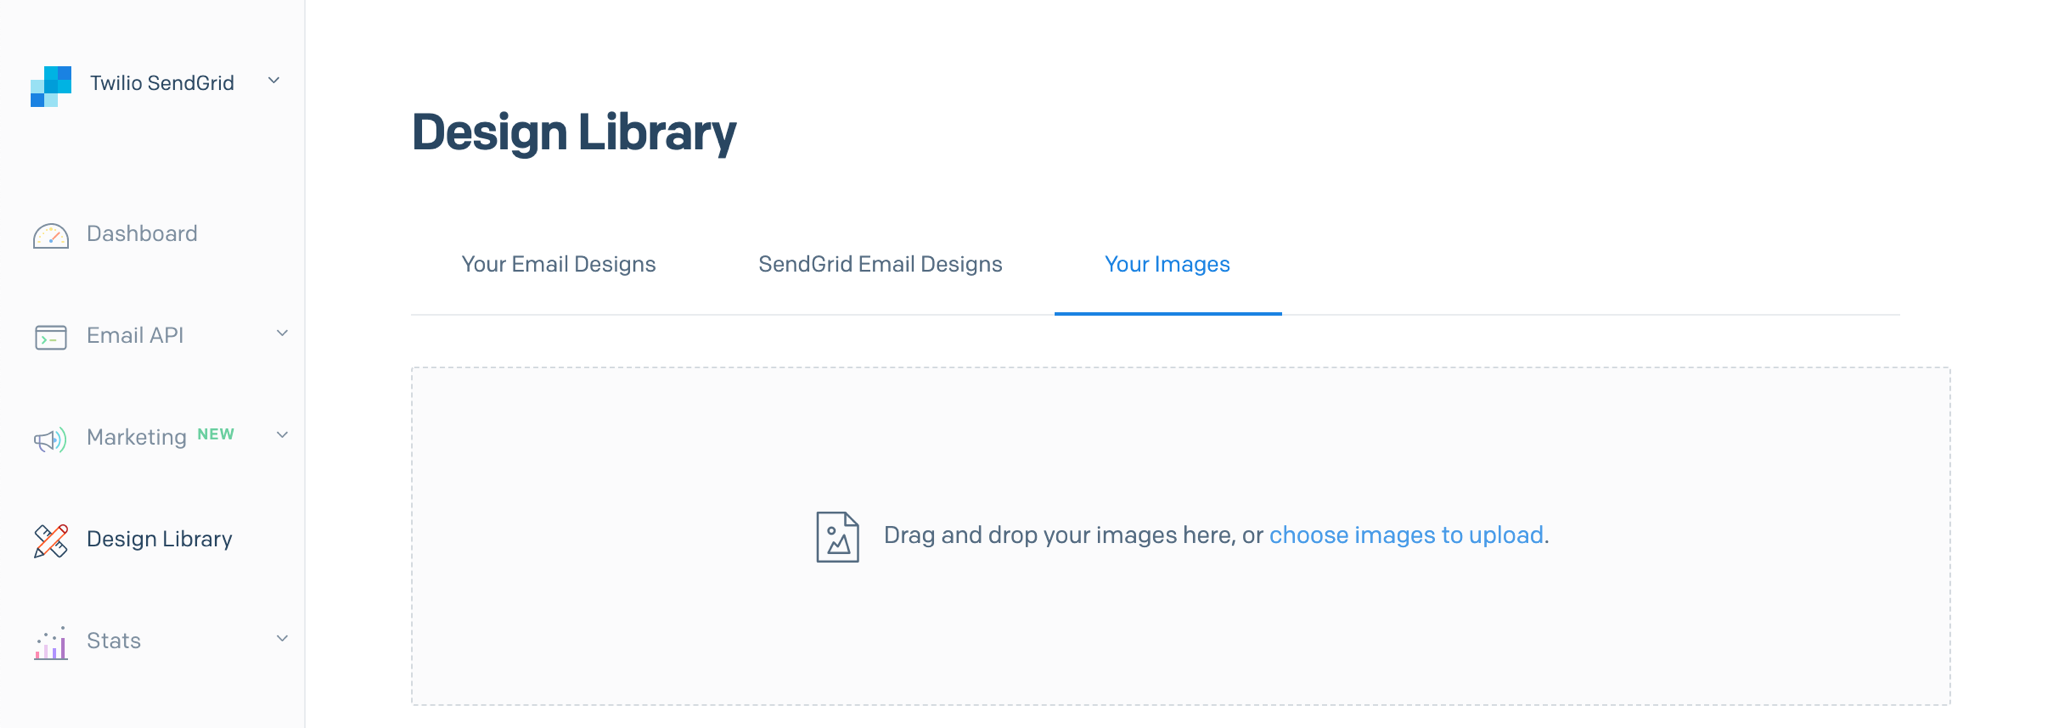 The Image Library landing page in the SendGrid App. Here you can upload new images or select existing images to edit.